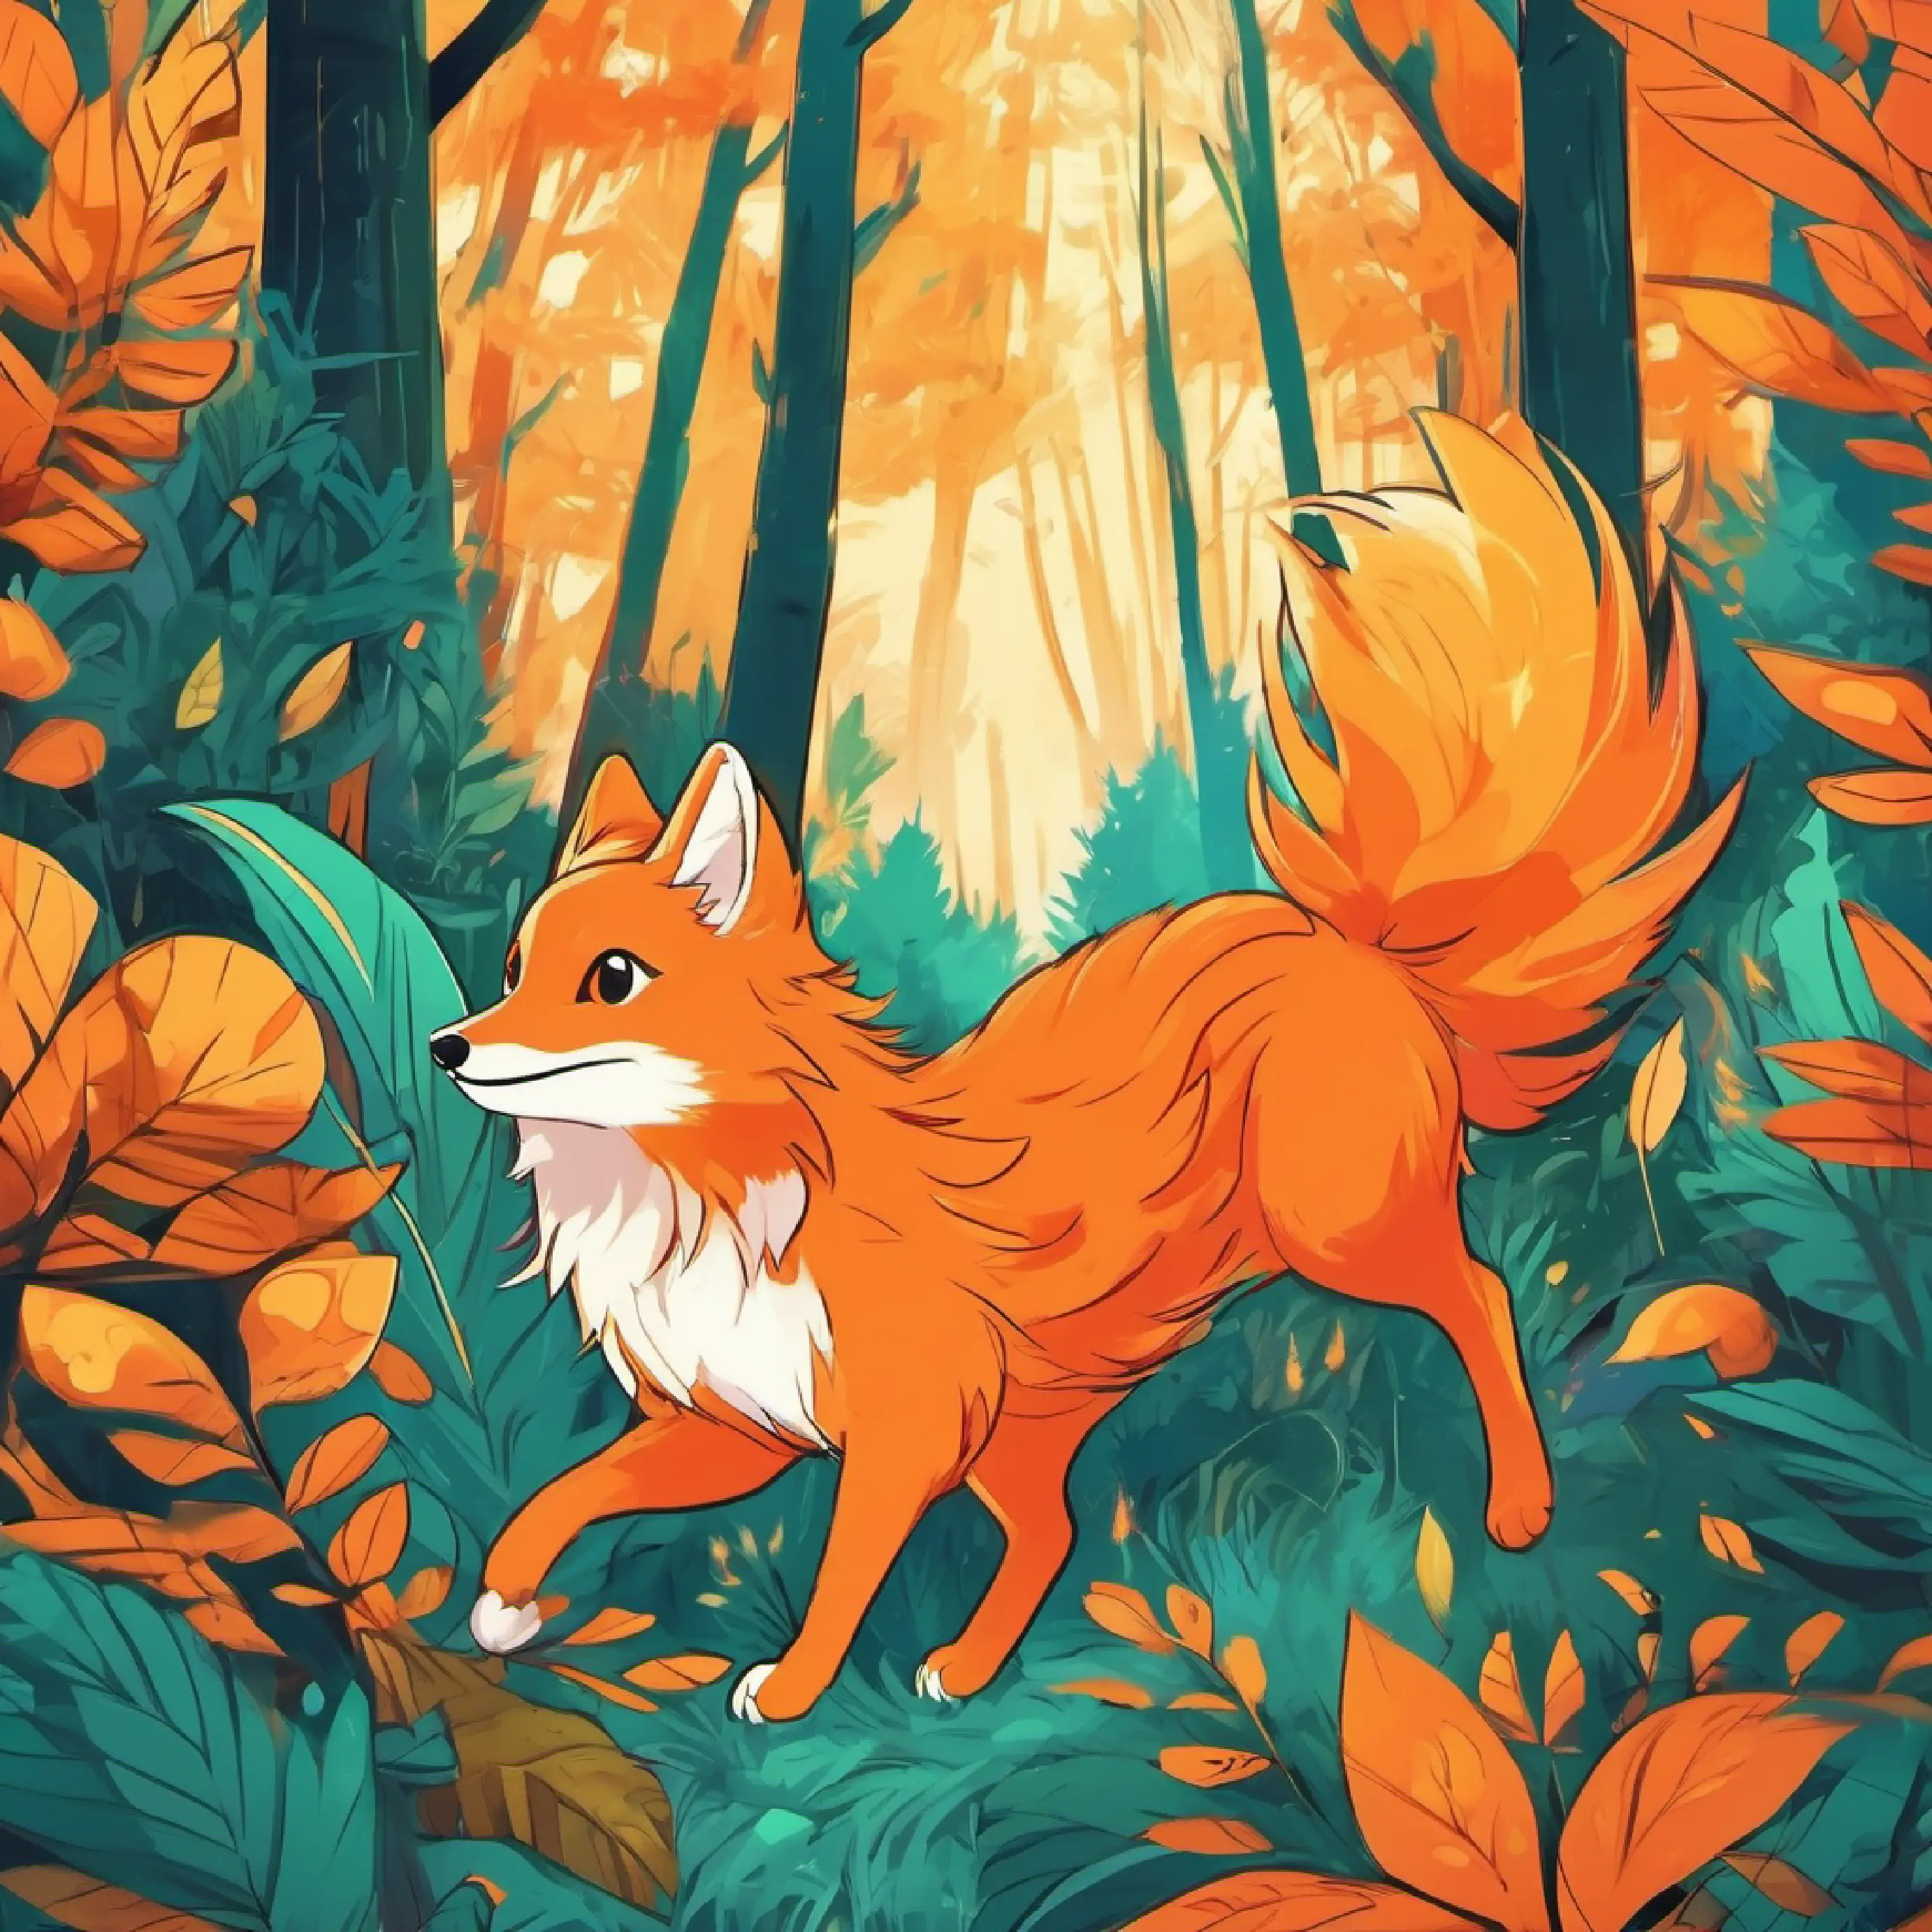 Orange fur, curious eyes, swift and rather playful playing energetically in a vibrant forest.